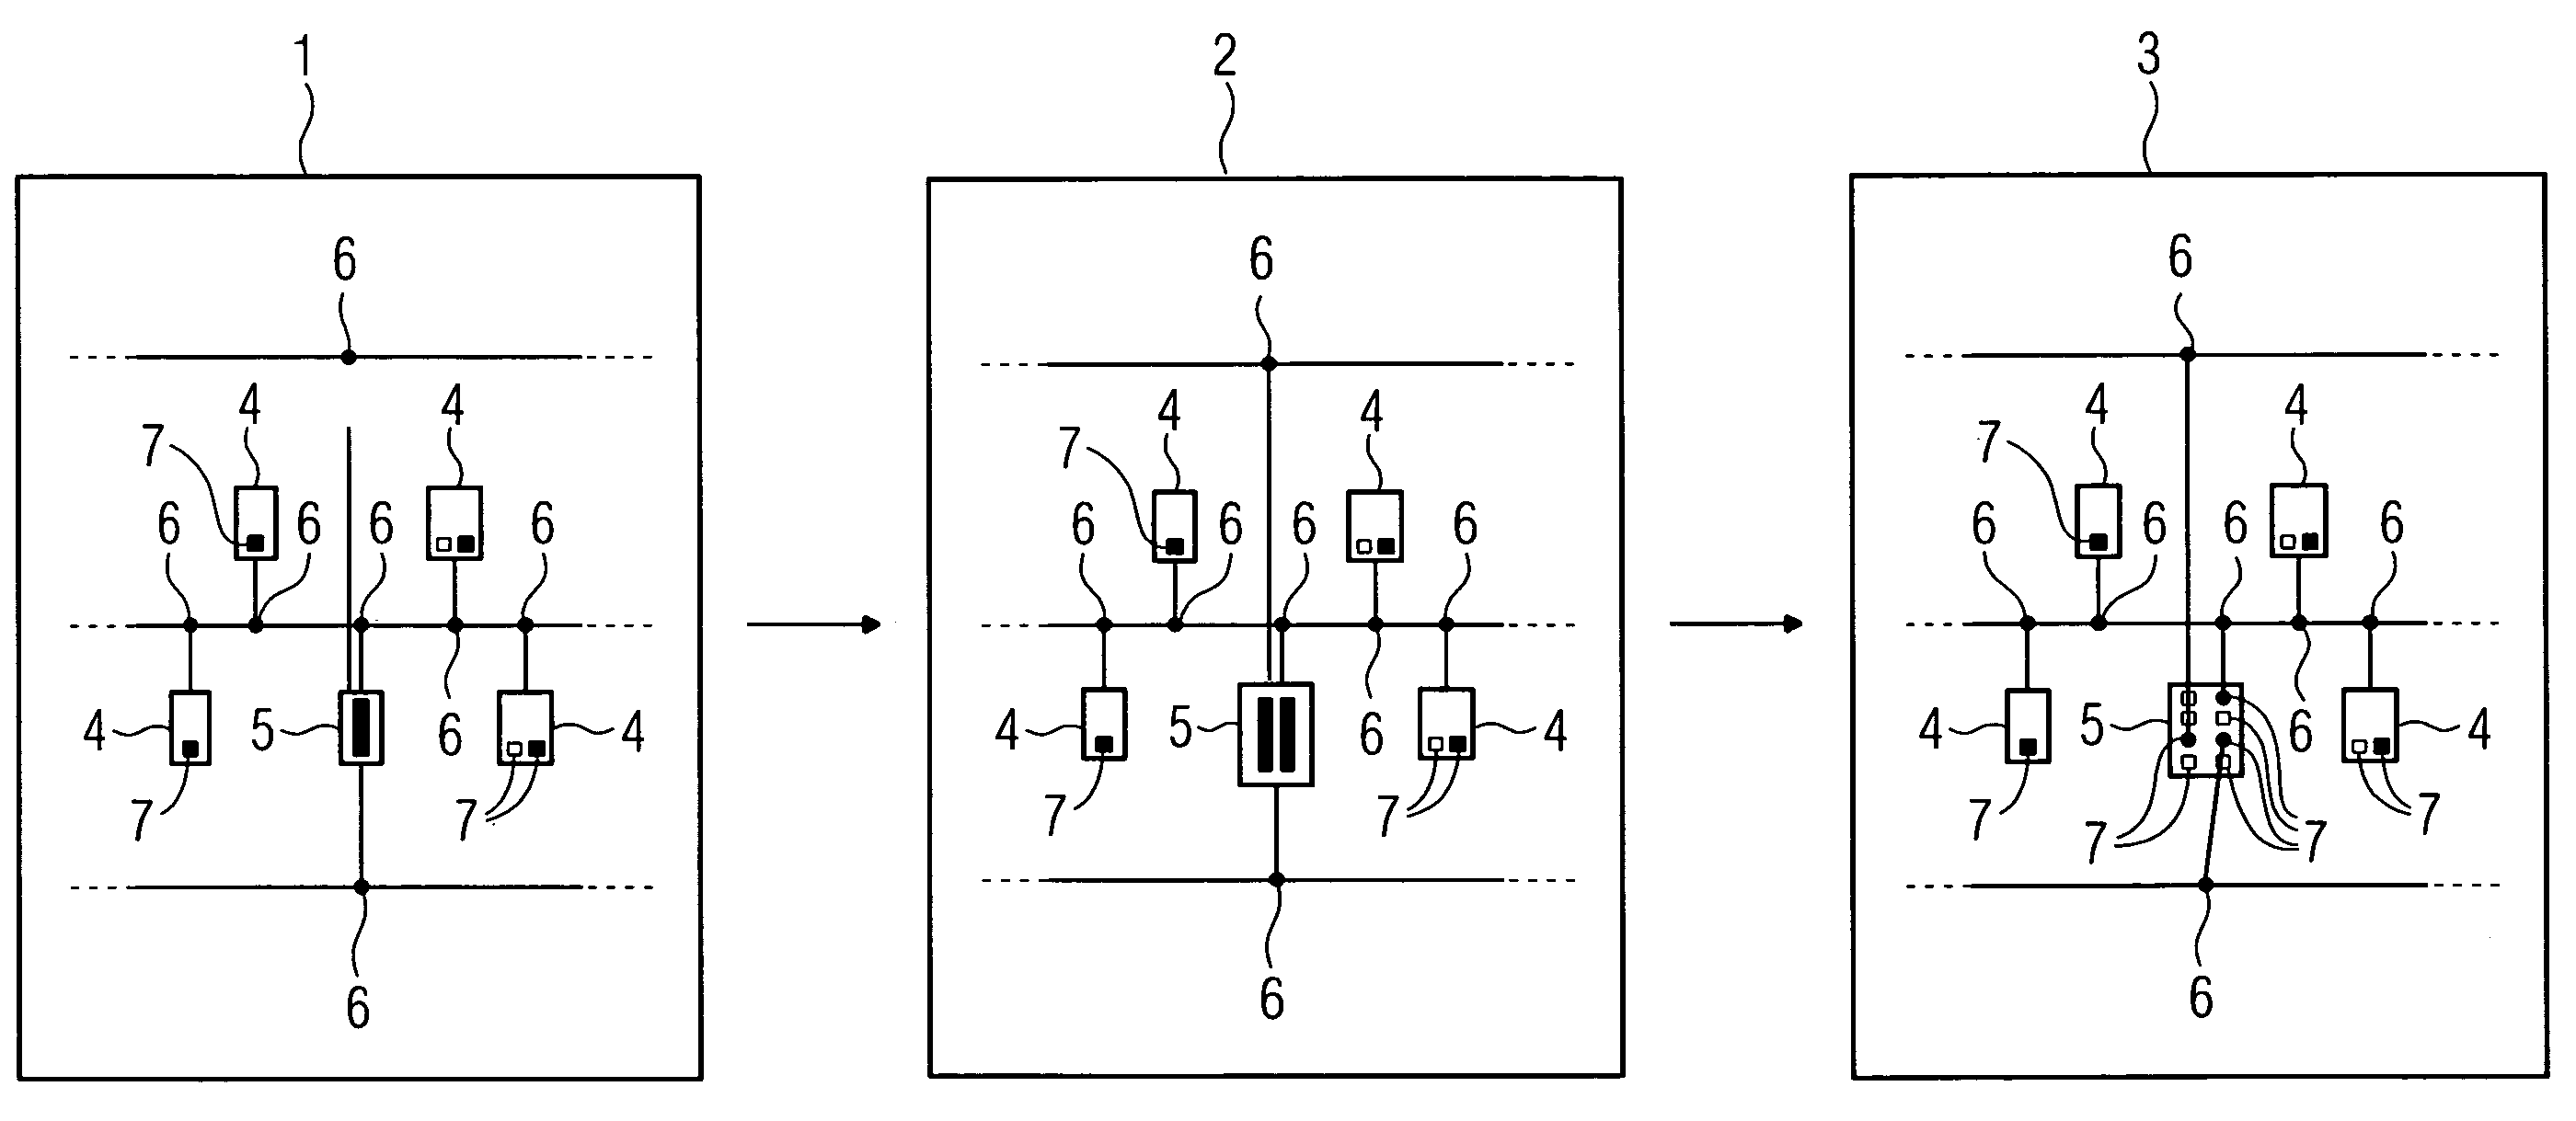 Selective detailed display of devices in a network